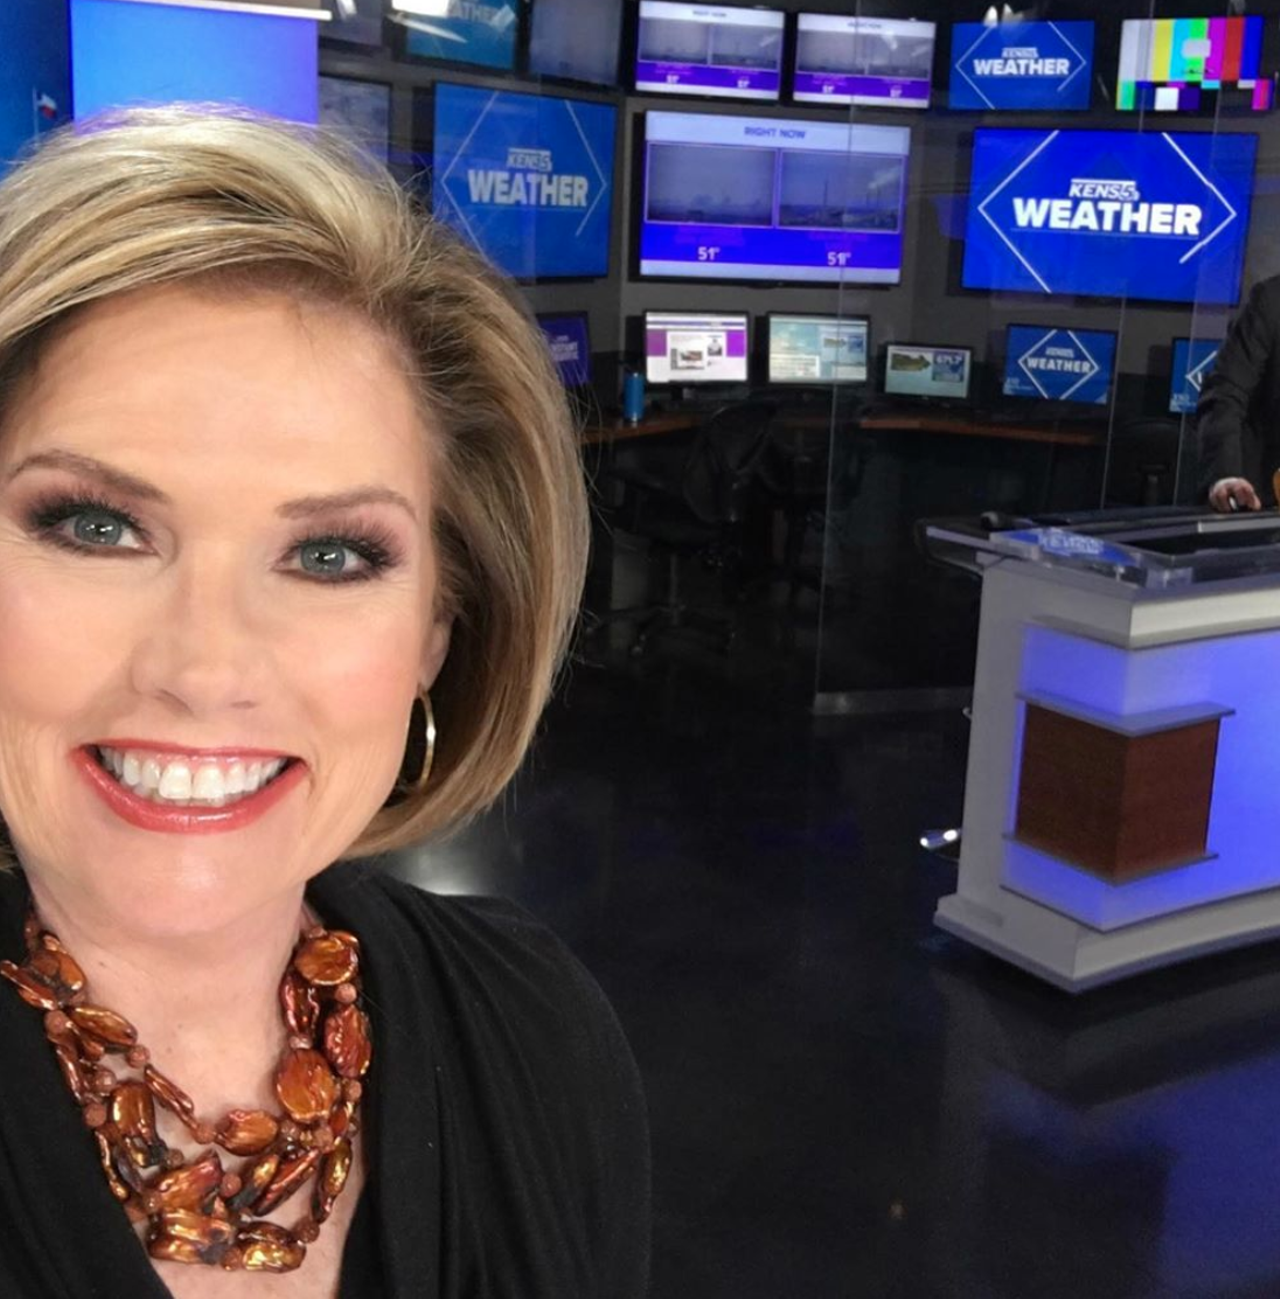 Deborah Knapp
With decades of experience as a news anchor, KENS 5’s Deborah Knapp is an Emmy award-winning journalist and an inductee of the San Antonio Women’s Hall of Fame. She’s even set up a scholarship to help a local student pay for college and set up the KENS 5 Excel Award to recognize SA teachers. How cool is that?!
Photo via Instagram / deborahknapp